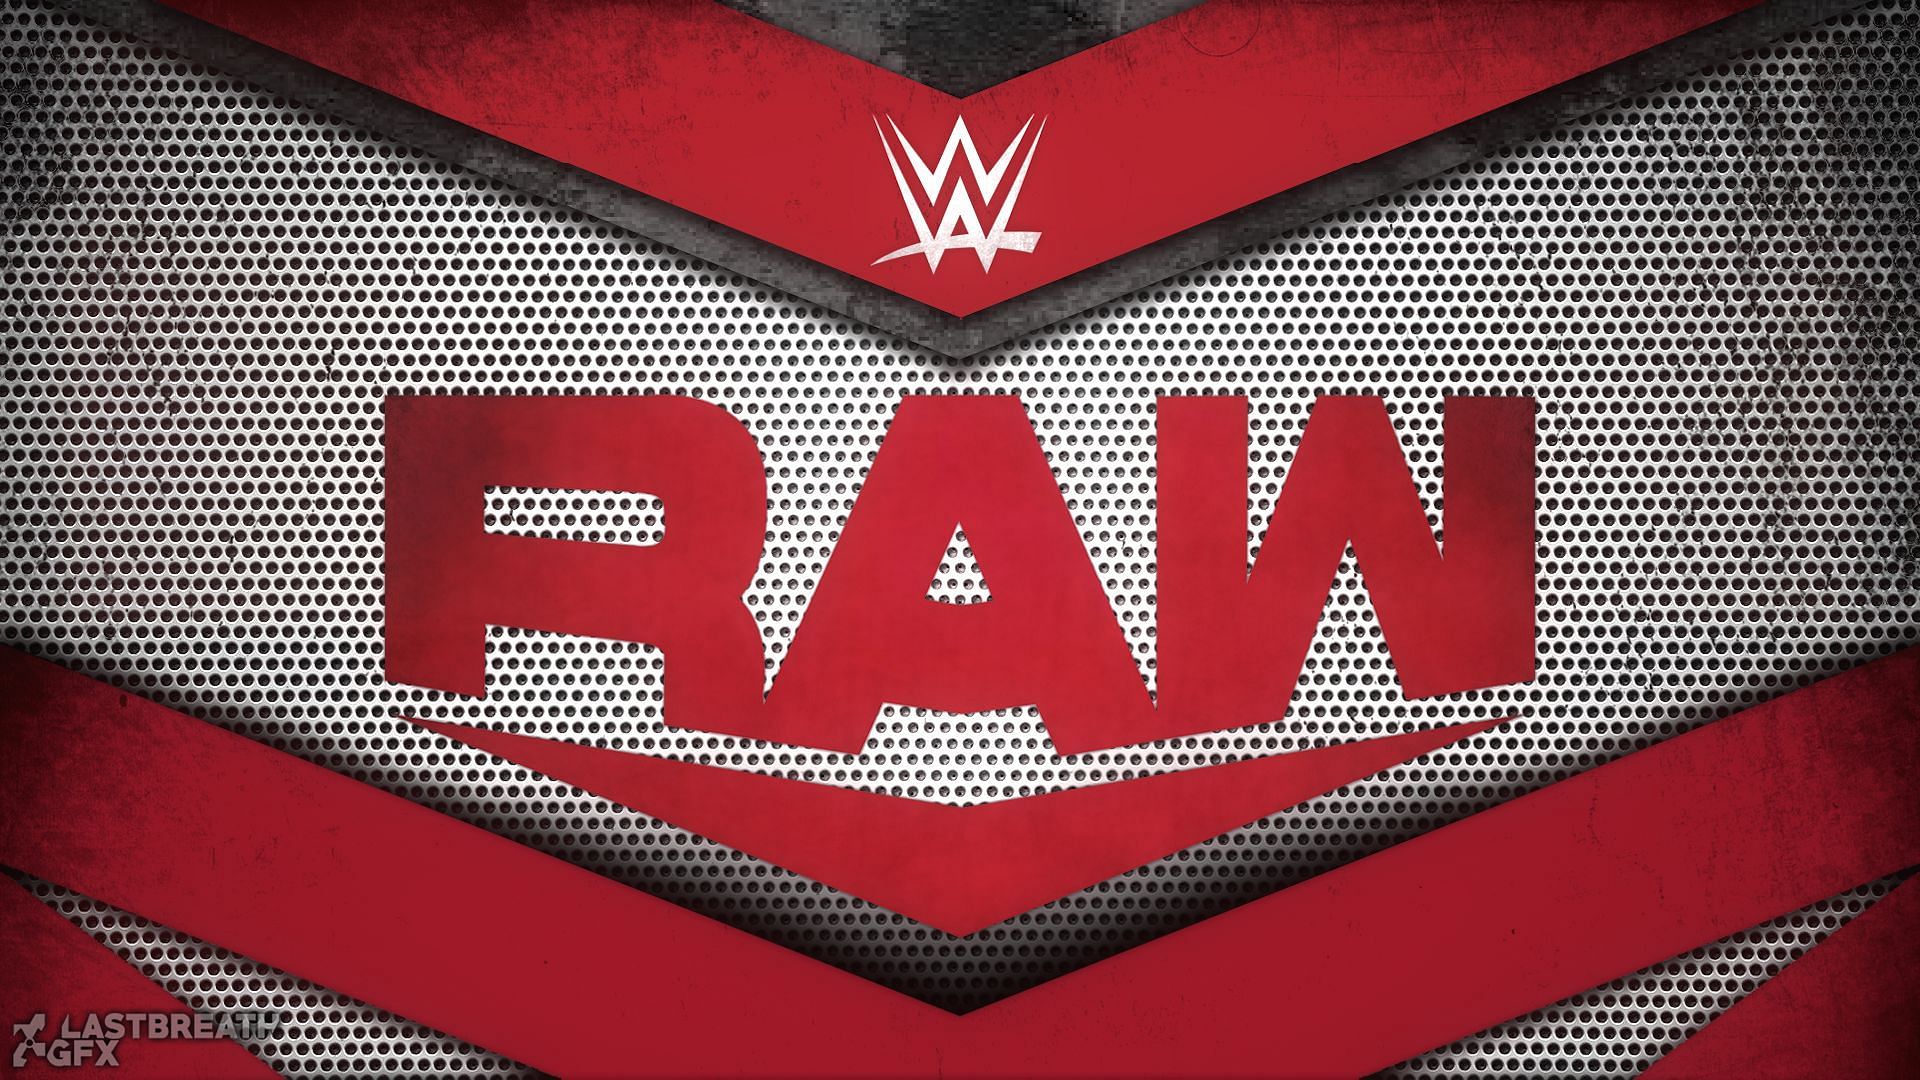 Monday Night Raw is the longest running weekly episodic television show